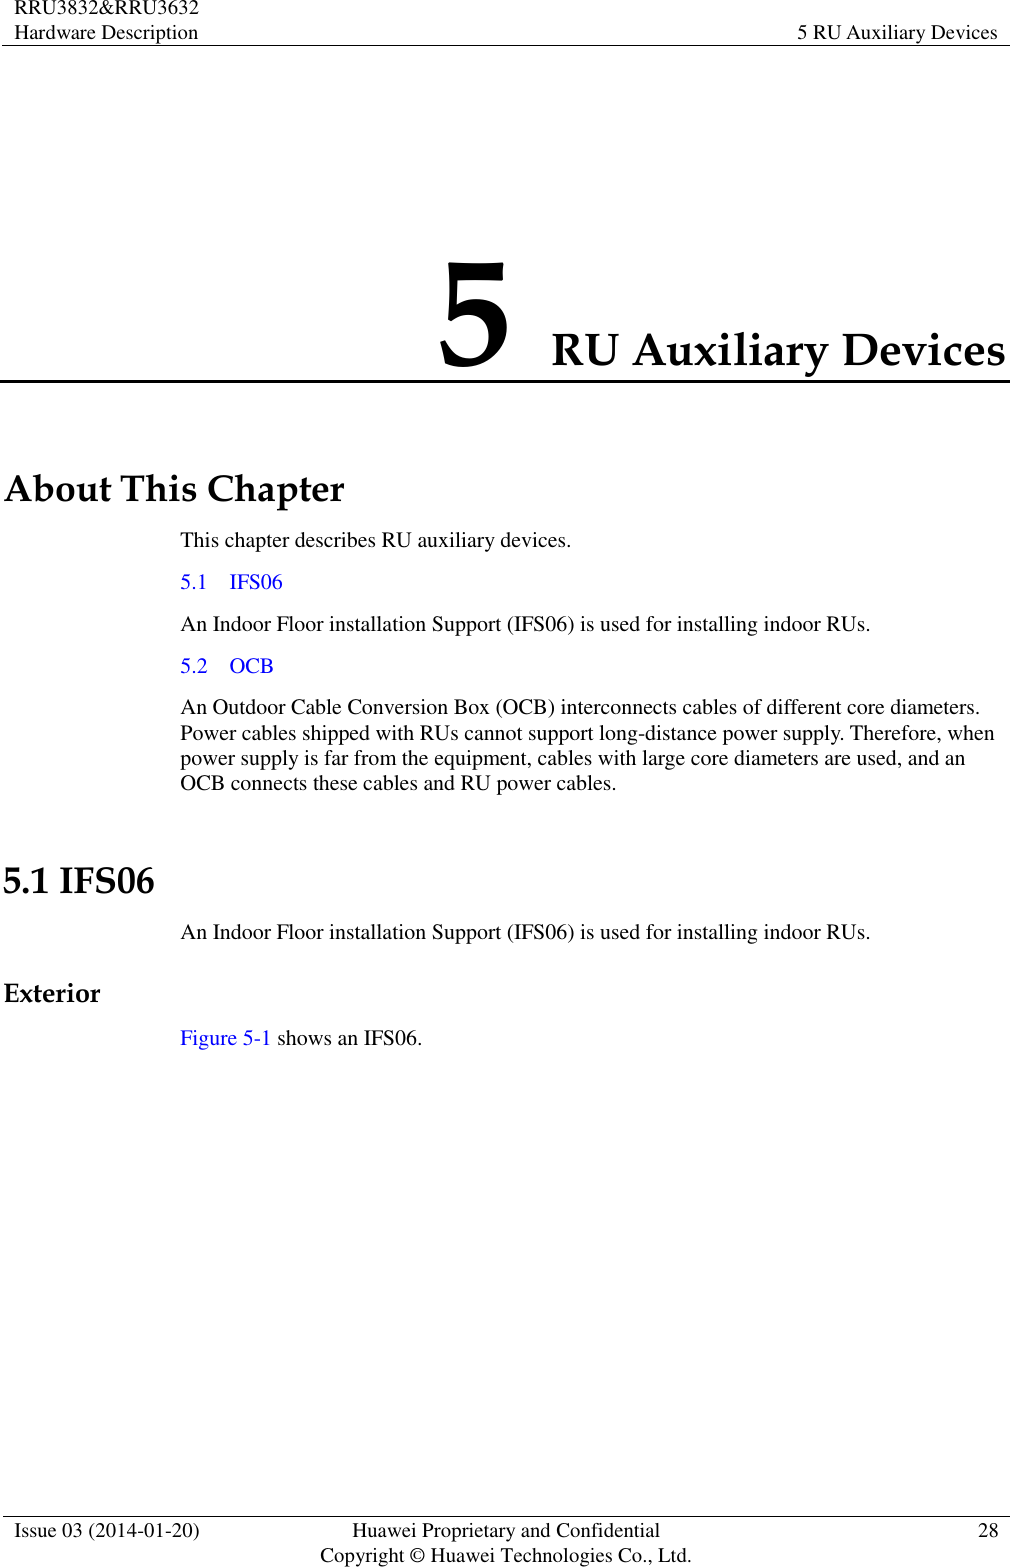 RRU3832&amp;RRU3632 Hardware Description 5 RU Auxiliary Devices  Issue 03 (2014-01-20) Huawei Proprietary and Confidential                                     Copyright © Huawei Technologies Co., Ltd. 28  5 RU Auxiliary Devices About This Chapter This chapter describes RU auxiliary devices. 5.1    IFS06 An Indoor Floor installation Support (IFS06) is used for installing indoor RUs. 5.2    OCB An Outdoor Cable Conversion Box (OCB) interconnects cables of different core diameters. Power cables shipped with RUs cannot support long-distance power supply. Therefore, when power supply is far from the equipment, cables with large core diameters are used, and an OCB connects these cables and RU power cables. 5.1 IFS06 An Indoor Floor installation Support (IFS06) is used for installing indoor RUs. Exterior Figure 5-1 shows an IFS06. 